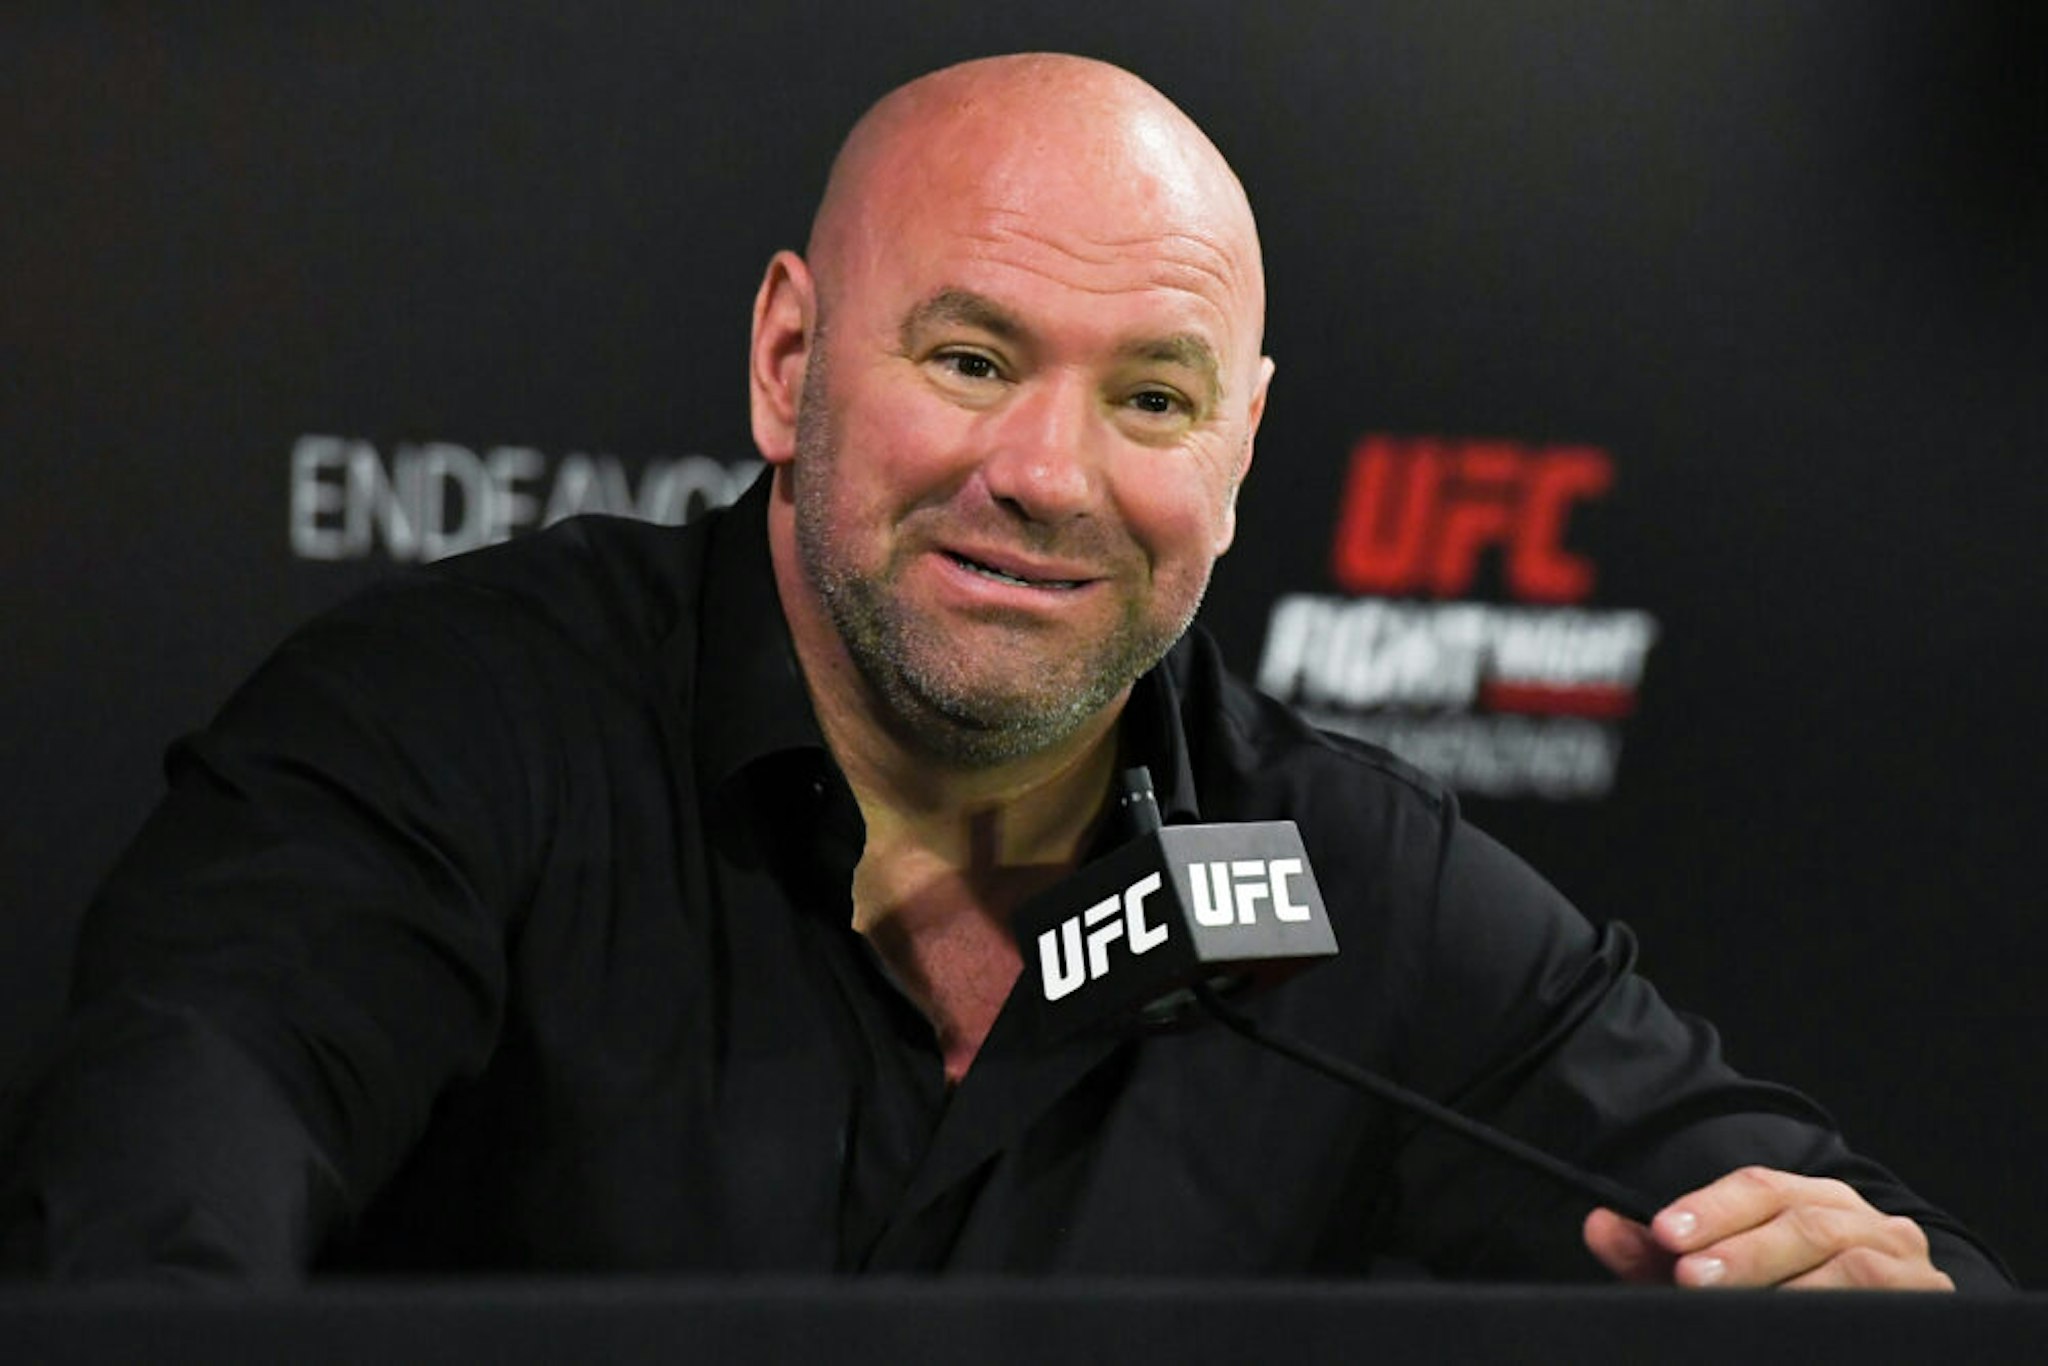 SHENZHEN, CHINA - AUGUST 31: UFC President Dana White attends the press conference after the UFC Fight Night event at Shenzhen Universiade Sports Centre on August 31, 2019 in Shenzhen, China.